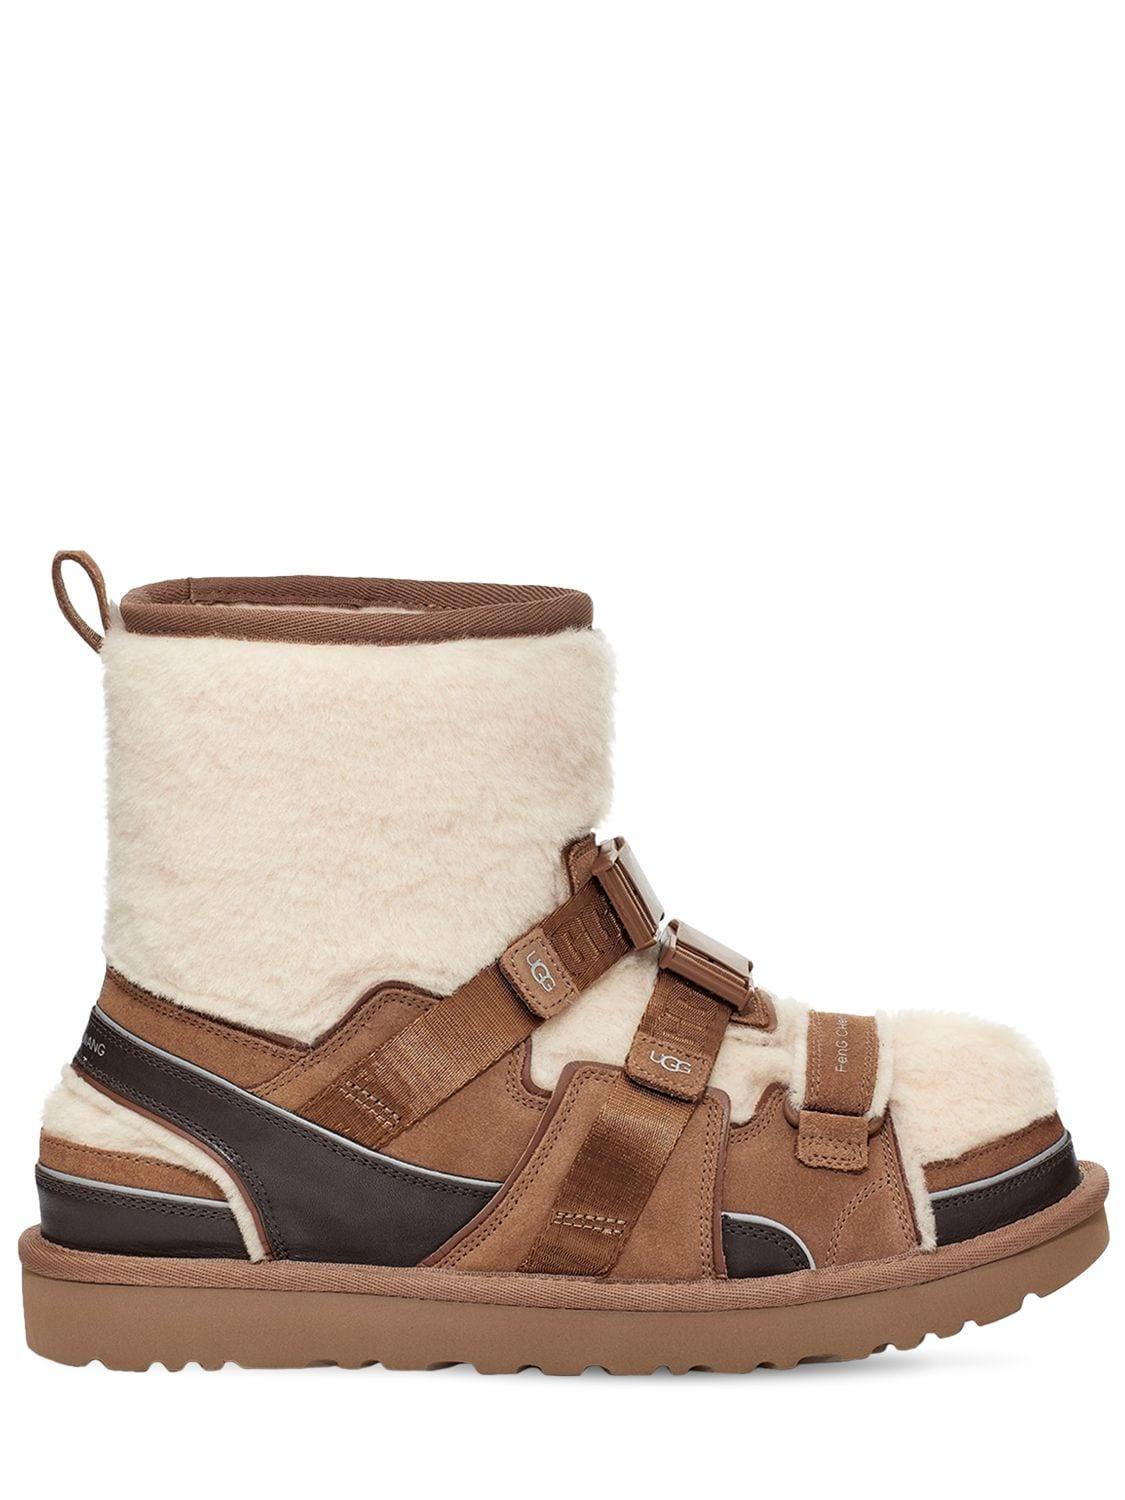 UGG X Feng Chen Wang 2-in-1 Boots in Brown | Lyst